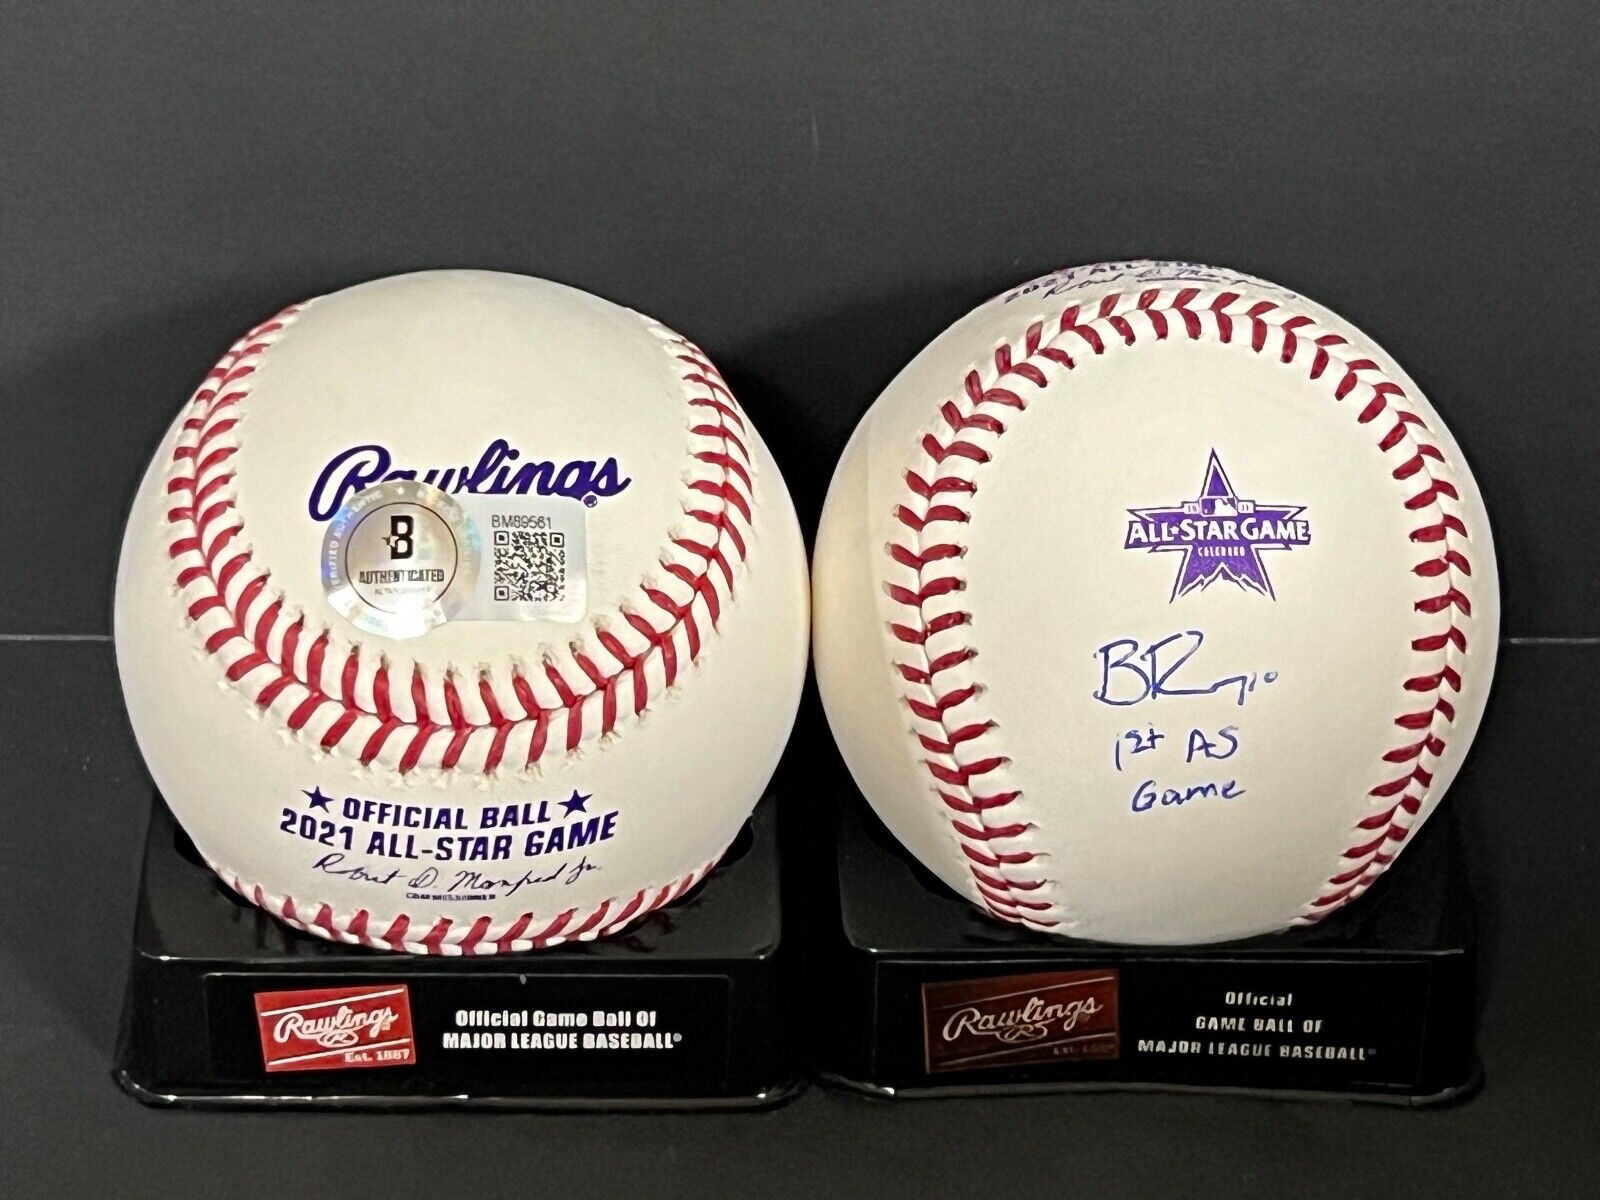 Bryan Reynolds Pirates Auto Signed 2021 All Star Baseball Beckett 1st AS Game